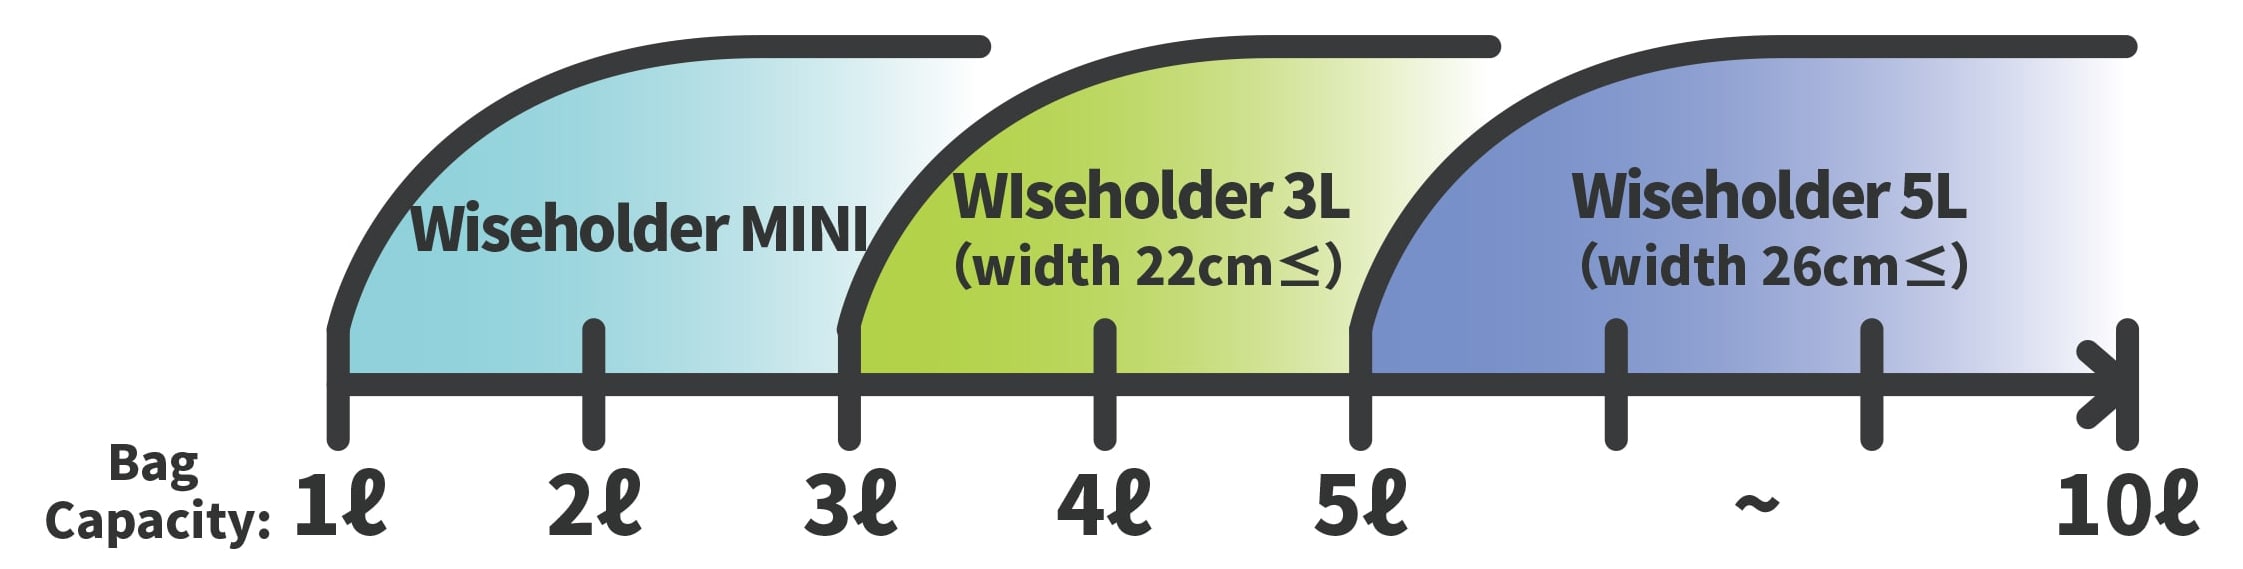 Wiseholder selection guide according to bags size